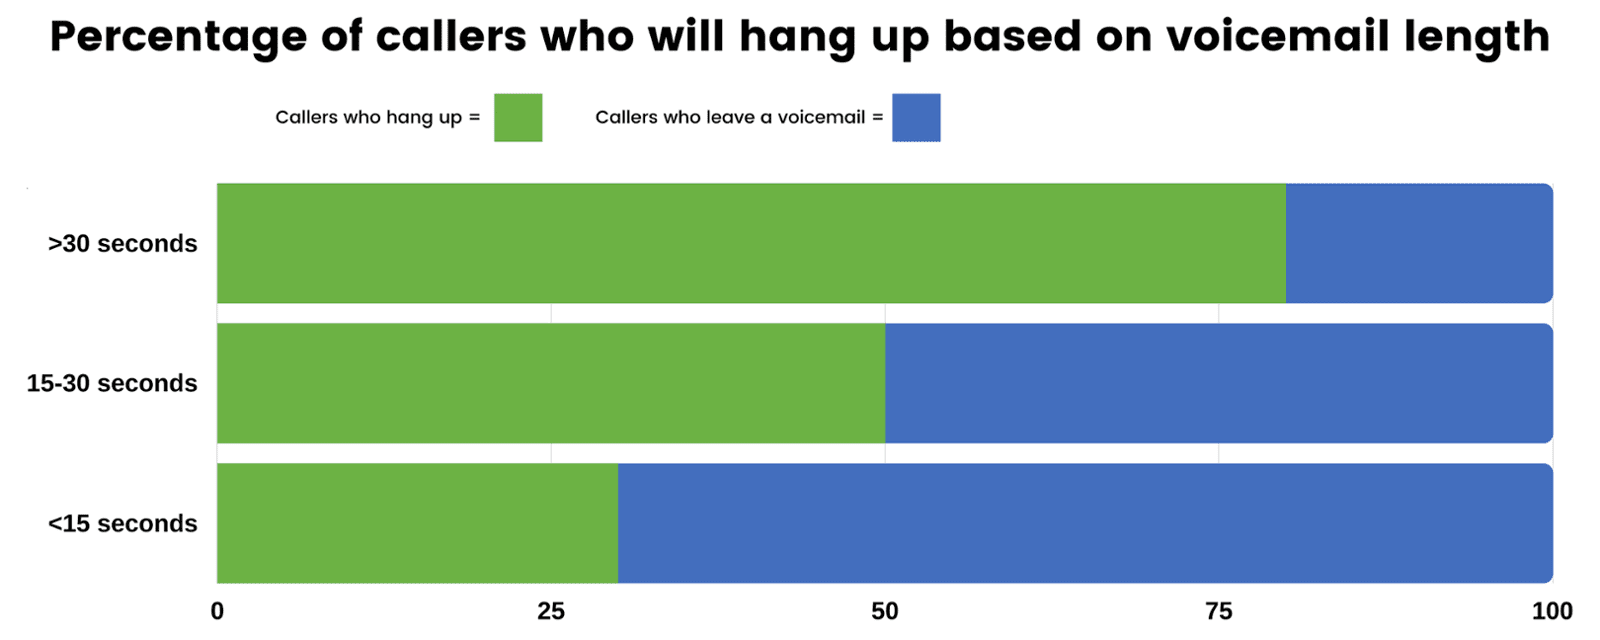 percentage of callers who will hang up based on voicemail length - stack chart